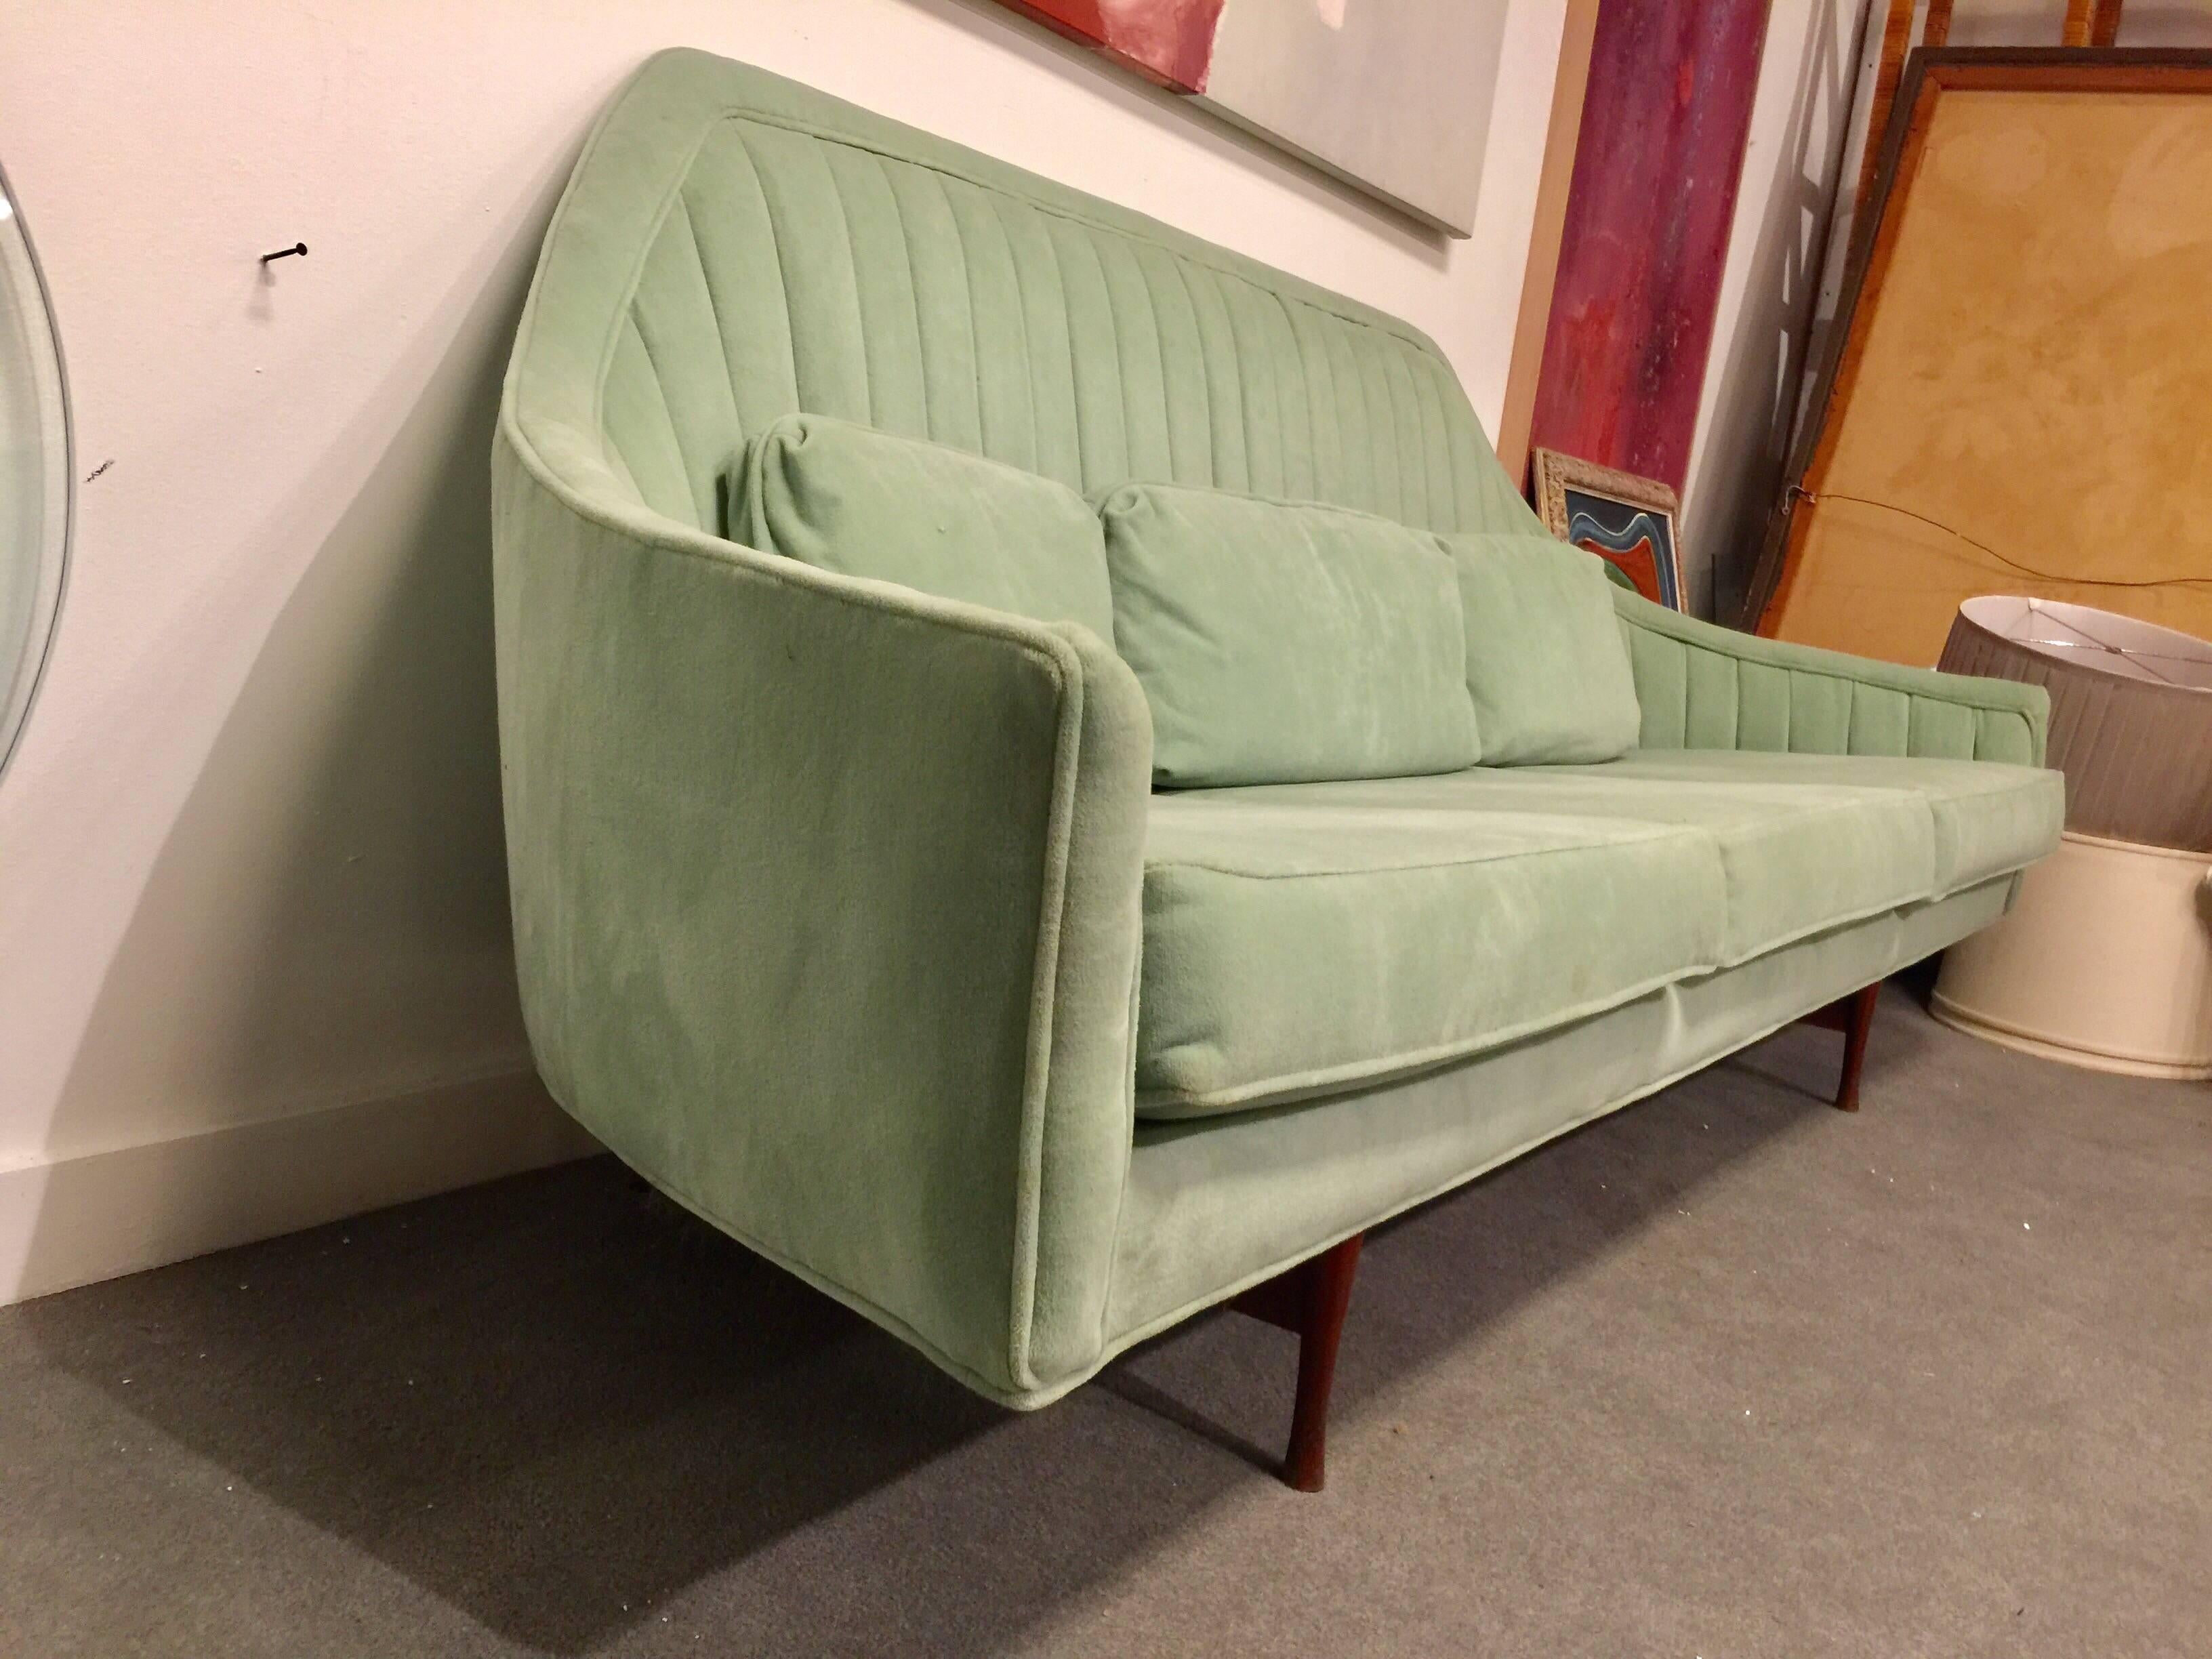 A Paul McCobb sofa for Widdicomb.
This is from the Symmetric Group.
Beautiful lines and scale.